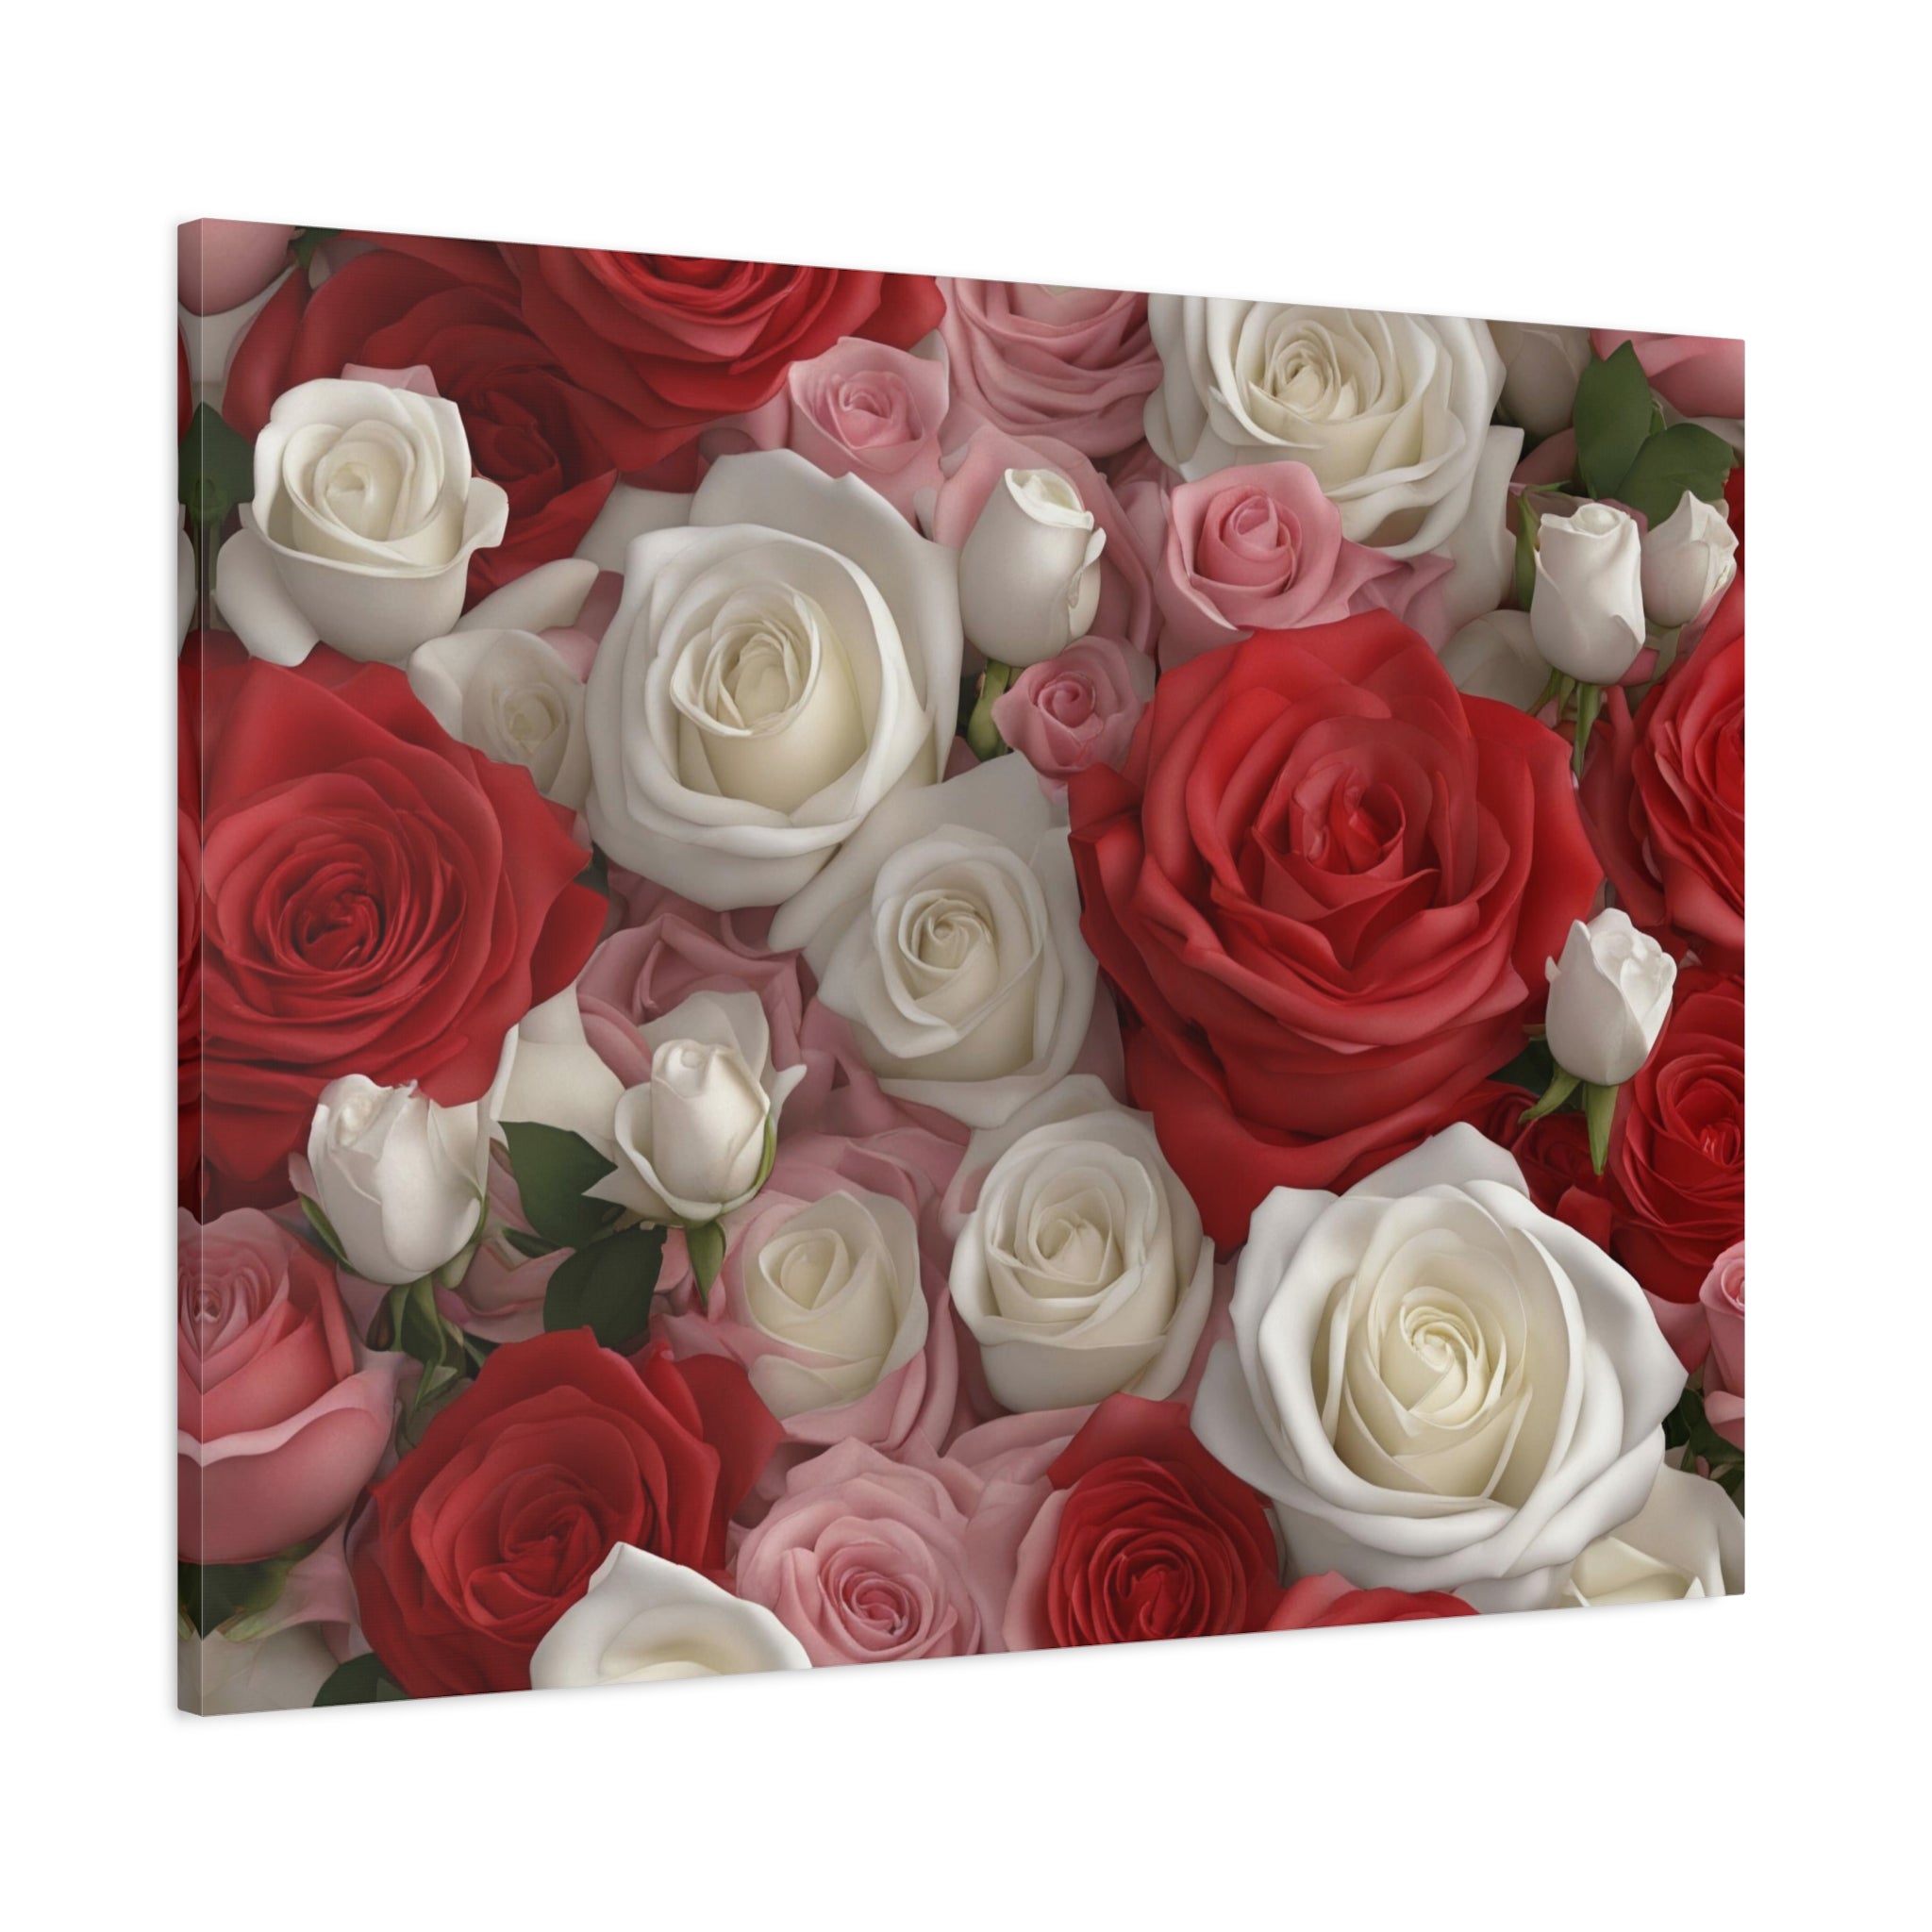 Wall Art ROSES Canvas Print Art Deco Painting Original Giclee 40X30 GW Love Flower Minimalist Beauty Fun Design Fit House Home Office Gift Ready Hang